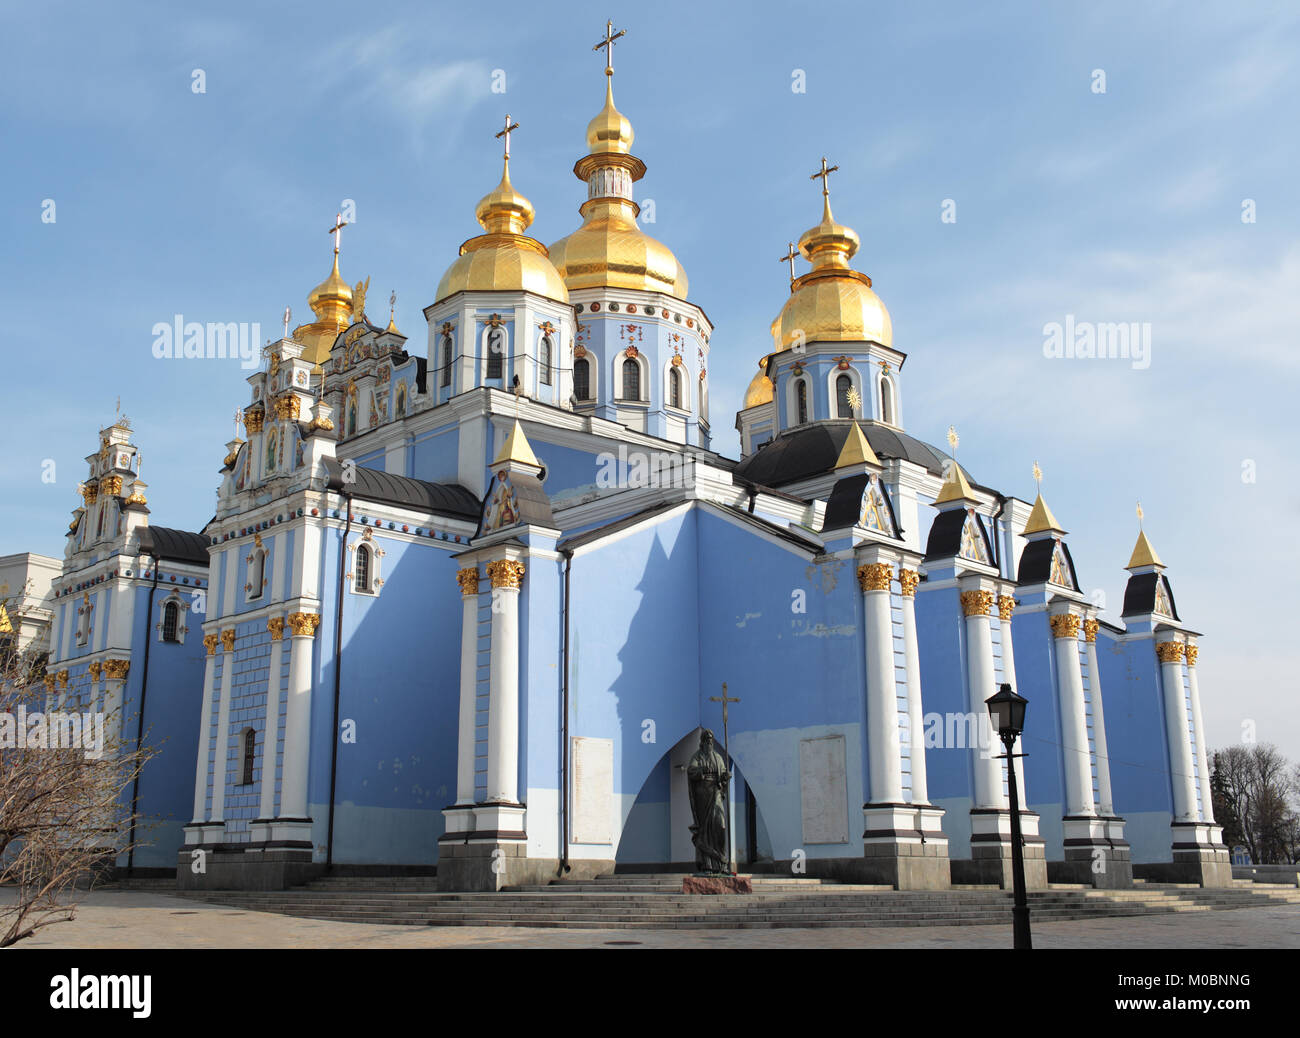 Kiev, Ukraine - April 14, 2012: St. Michaels Golden-Domed Cathedral, the main church of the monastery of the same name.The monastery was reconstructed Stock Photo